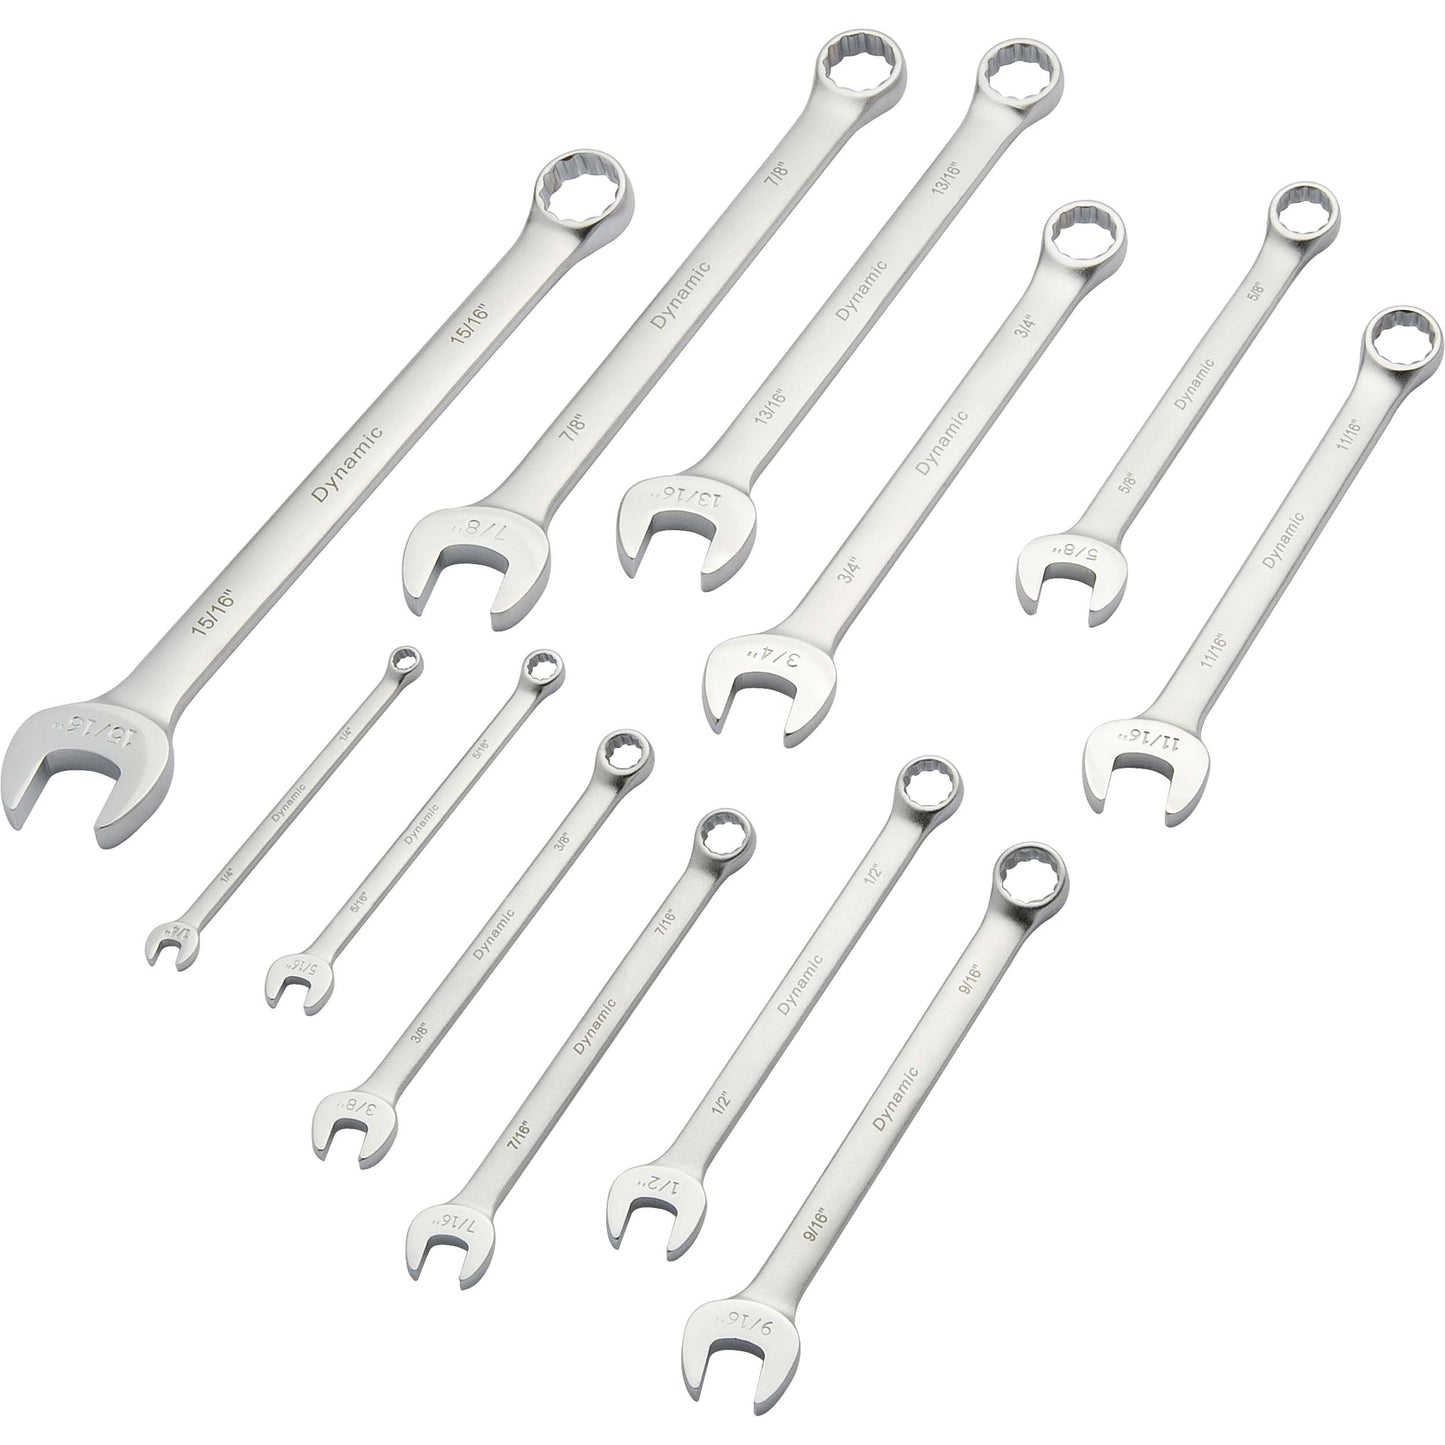 Wrench Set, Contractor Series, with Satin Finish, 12pc, SAE, Combination, 1/4" - 15/16" alt 0